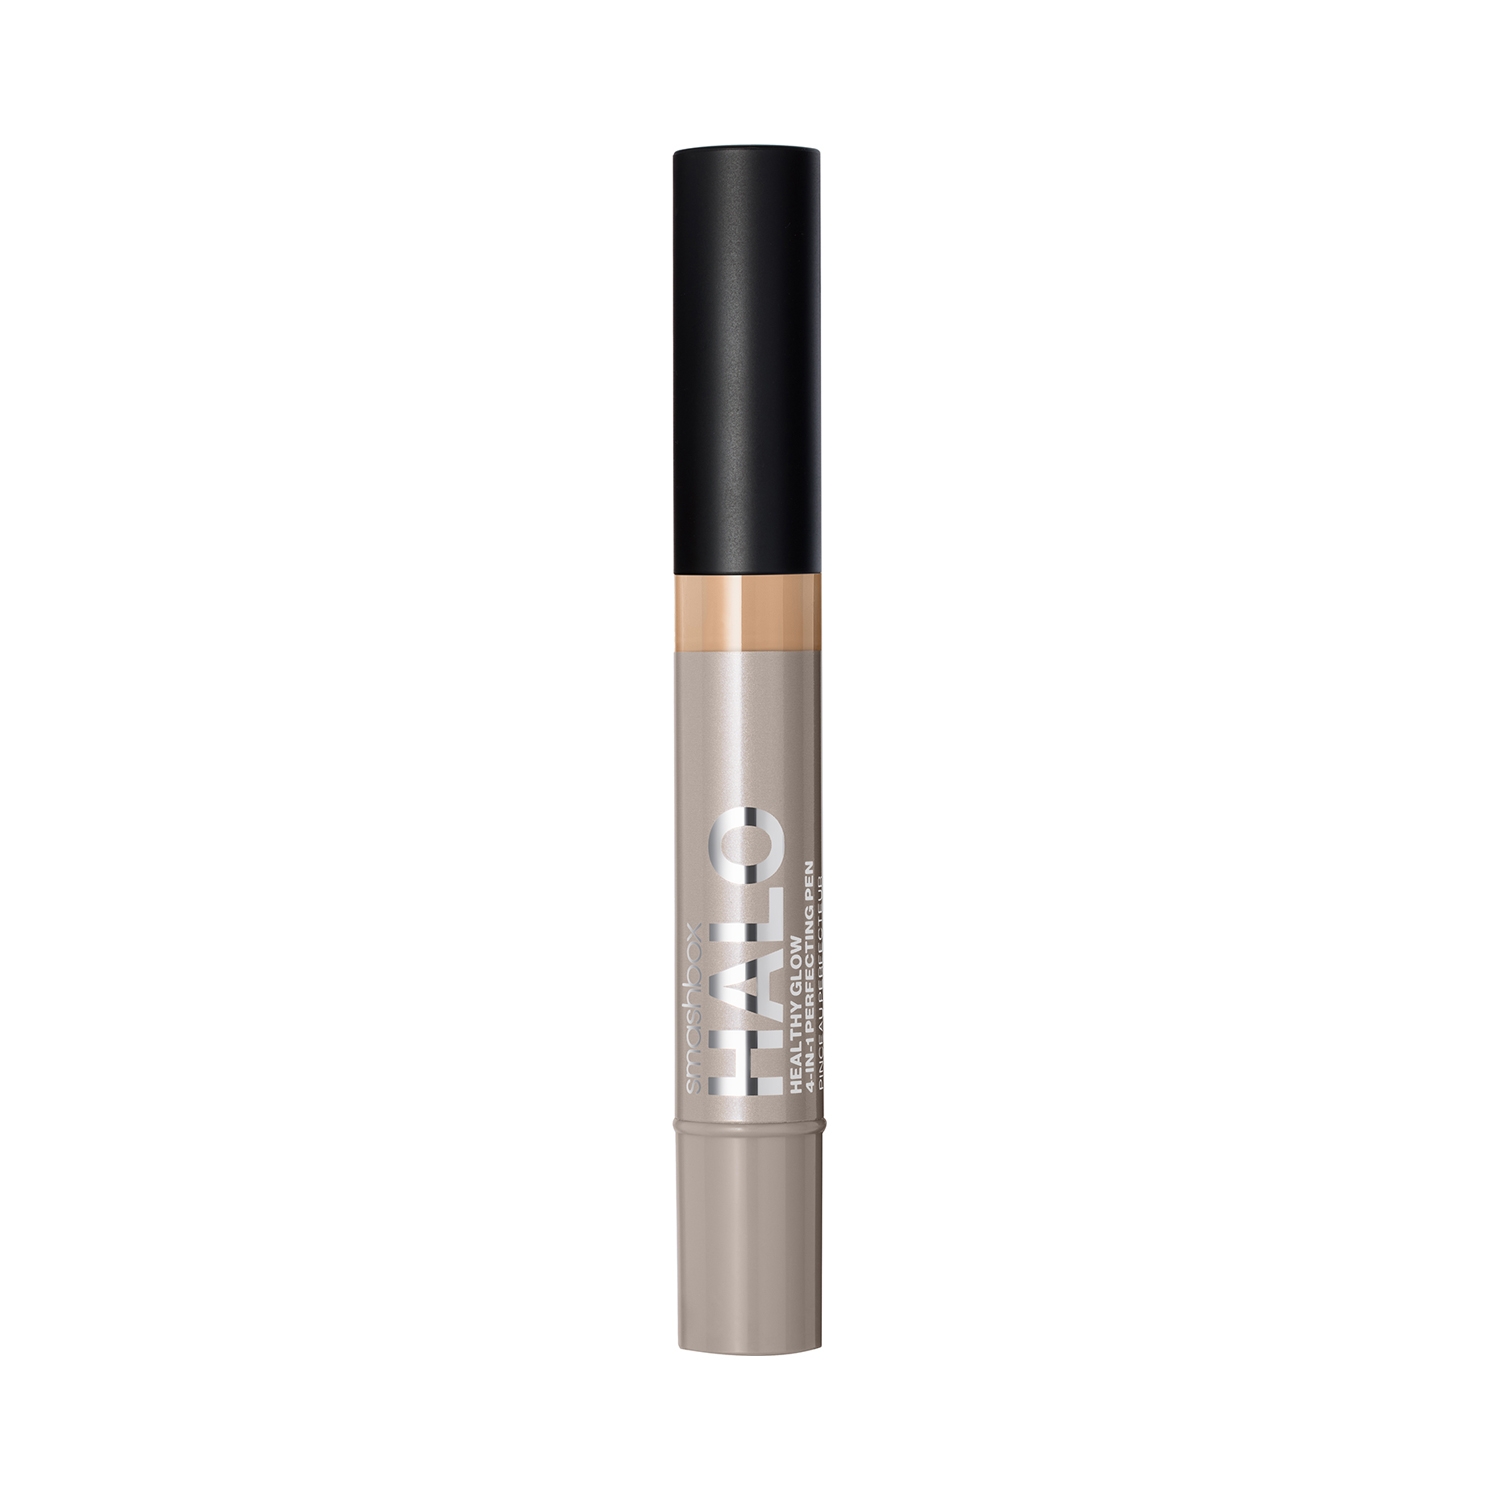 Smashbox Halo Healthy Glow 4-In-1 Perfecting Concealer Pen - L20N (3.5ml)